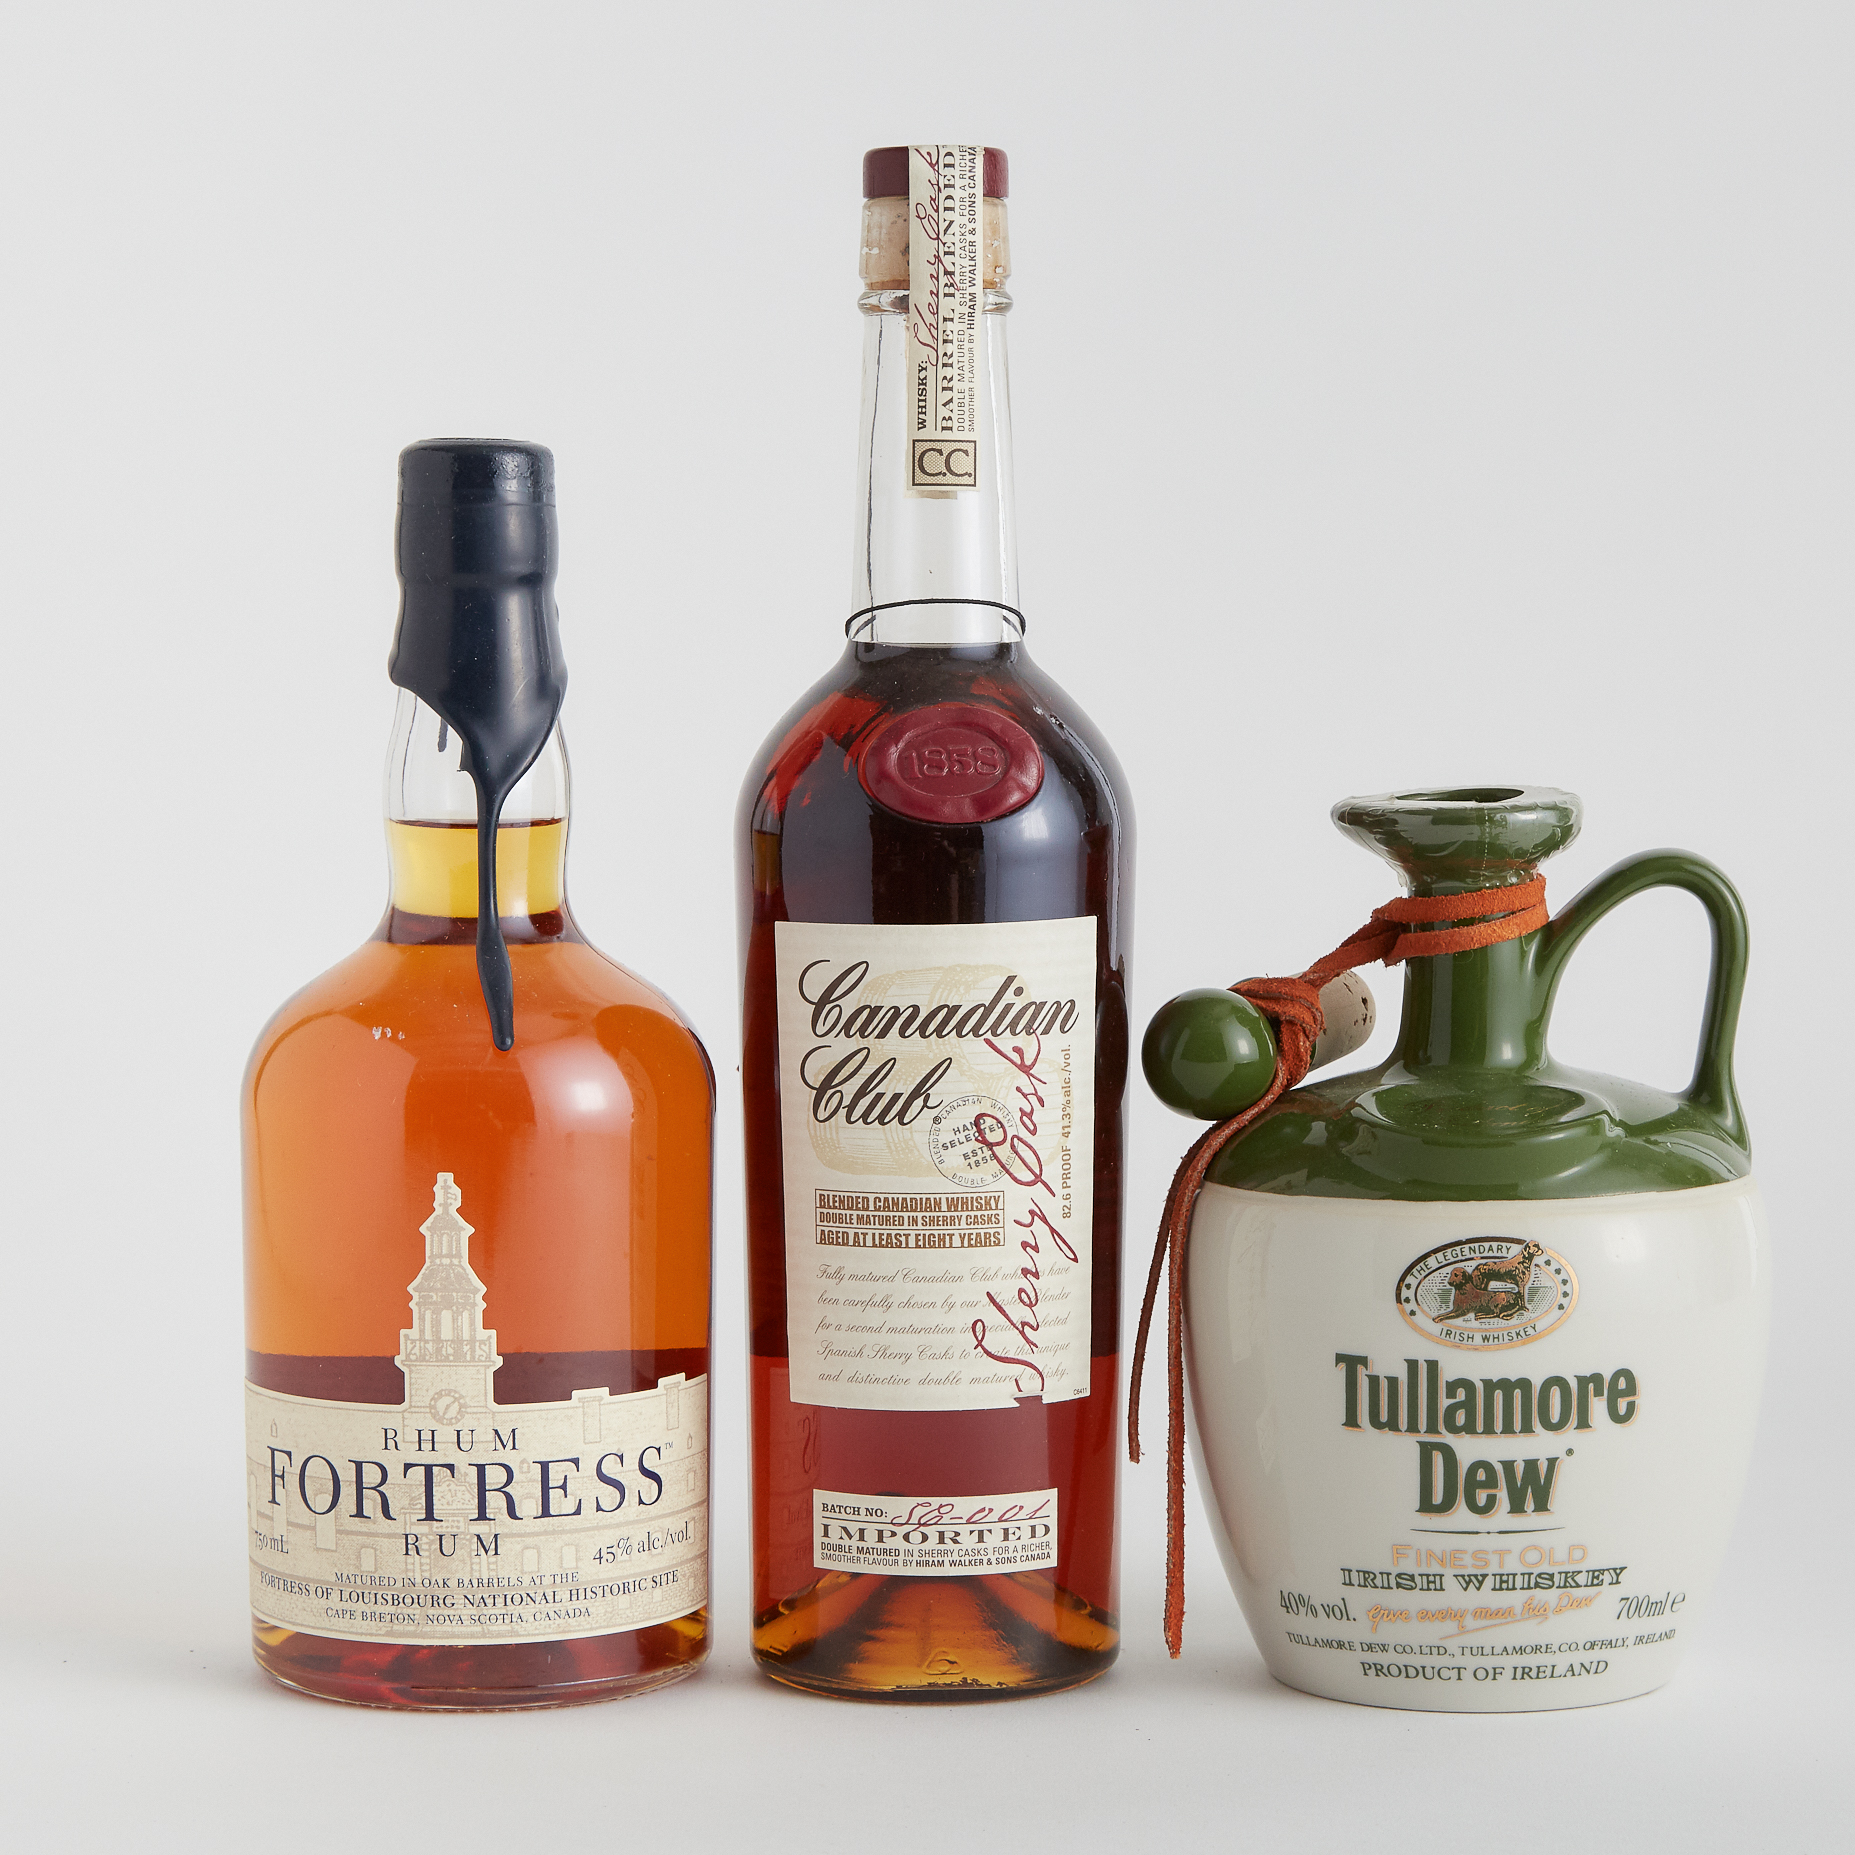 CANADIAN CLUB BLENDED CANADIAN WHISKY 8 YEARS (ONE 750 ML)
FORTRESS RUM NAS (ONE 750 ML)
TULLAMORE DEW IRISH WHISKEY NAS (ONE 700 ML)